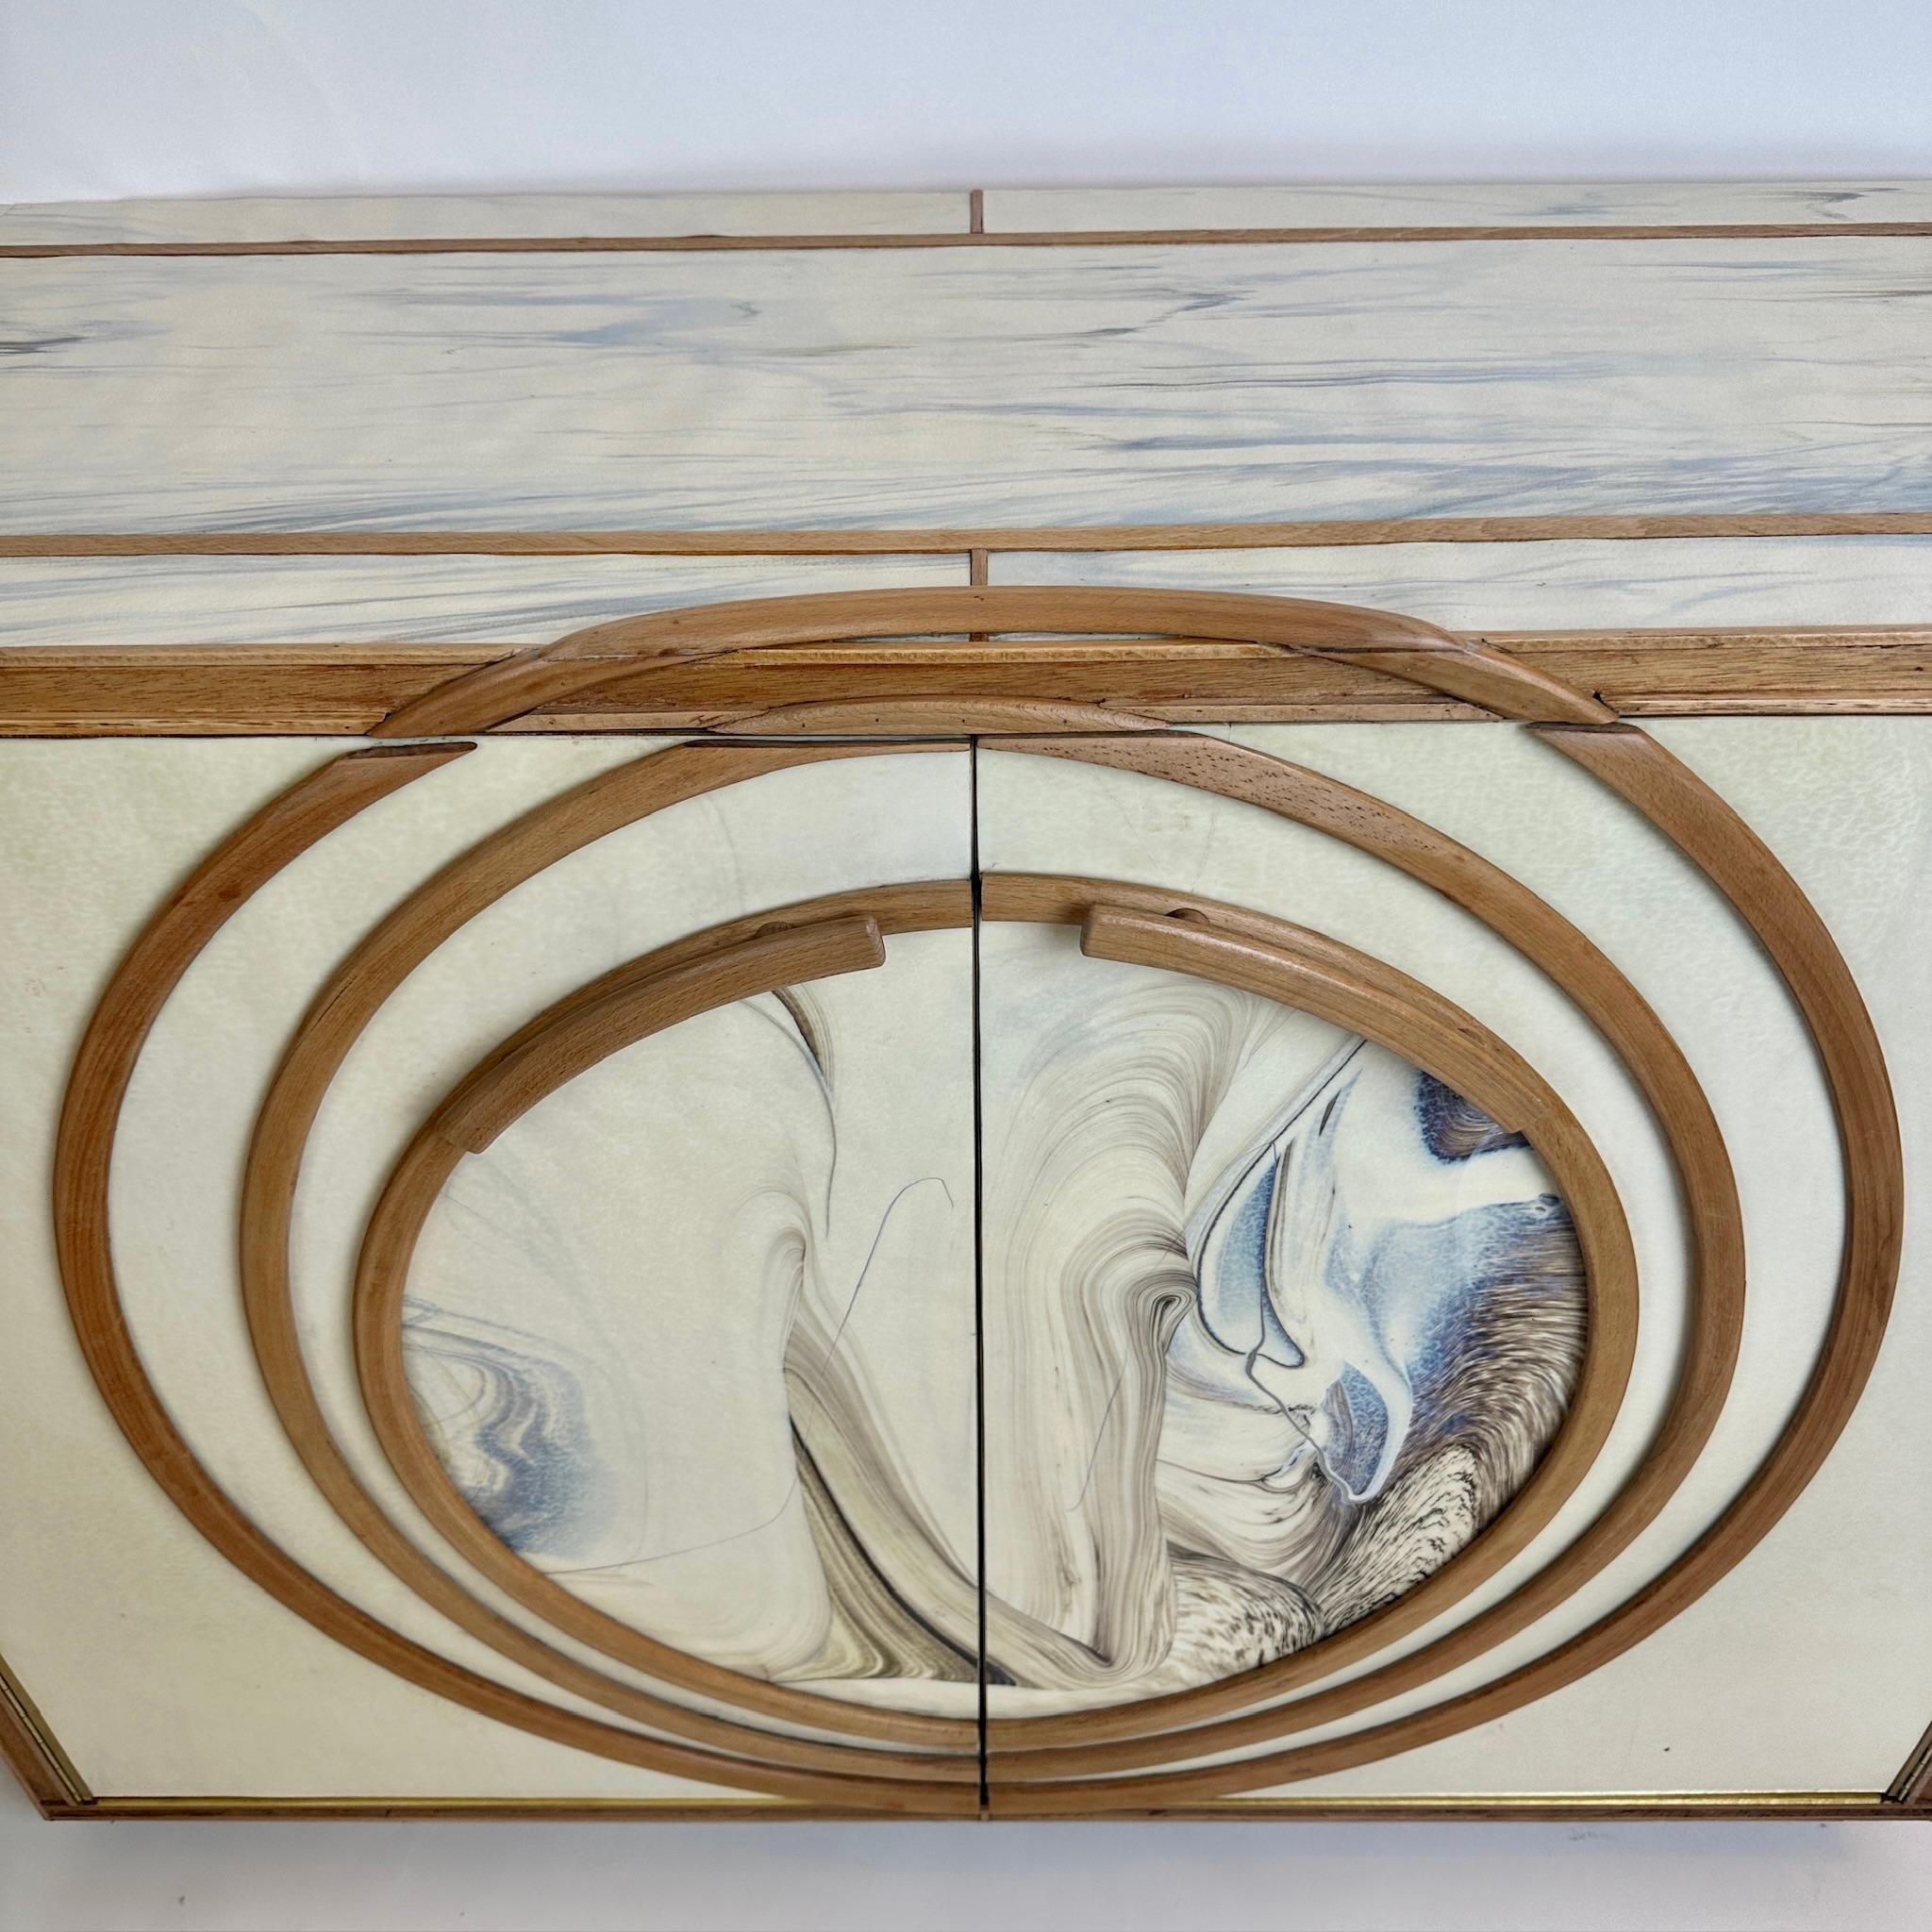 Magnificient pair of white textured Murano art glass (with touches of blue and brown) & beech wood with brass details cabinets. One central and removable wood shelf inside. Solid beech wood handles to pull open the two cabinet doors. All the wood